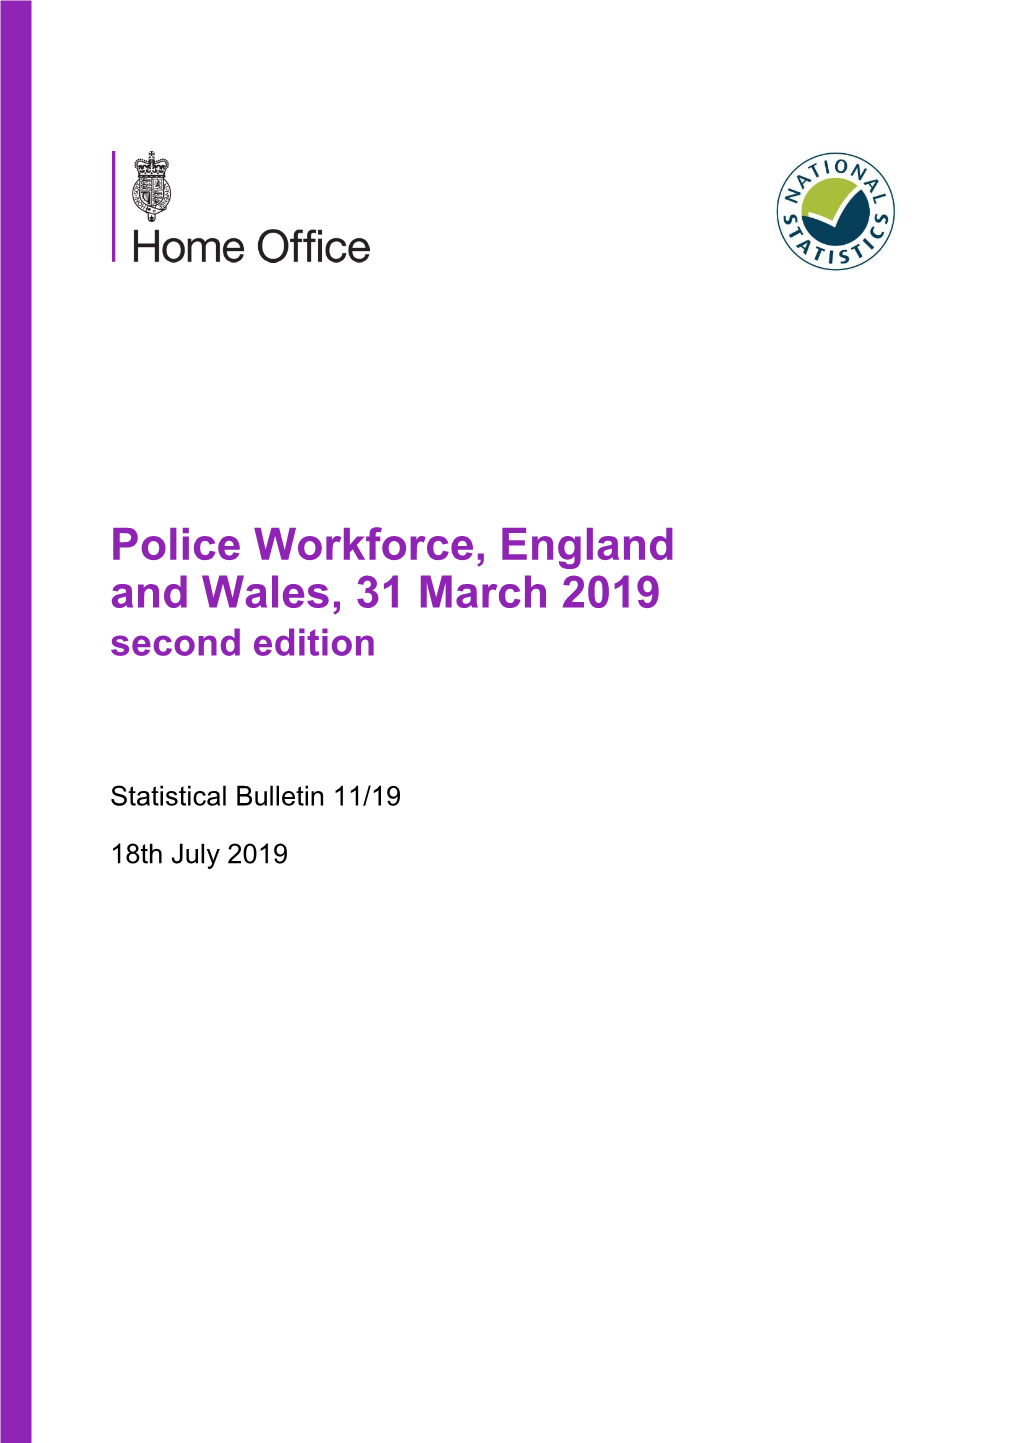 Police Workforce, England and Wales, 31 March 2019 Second Edition